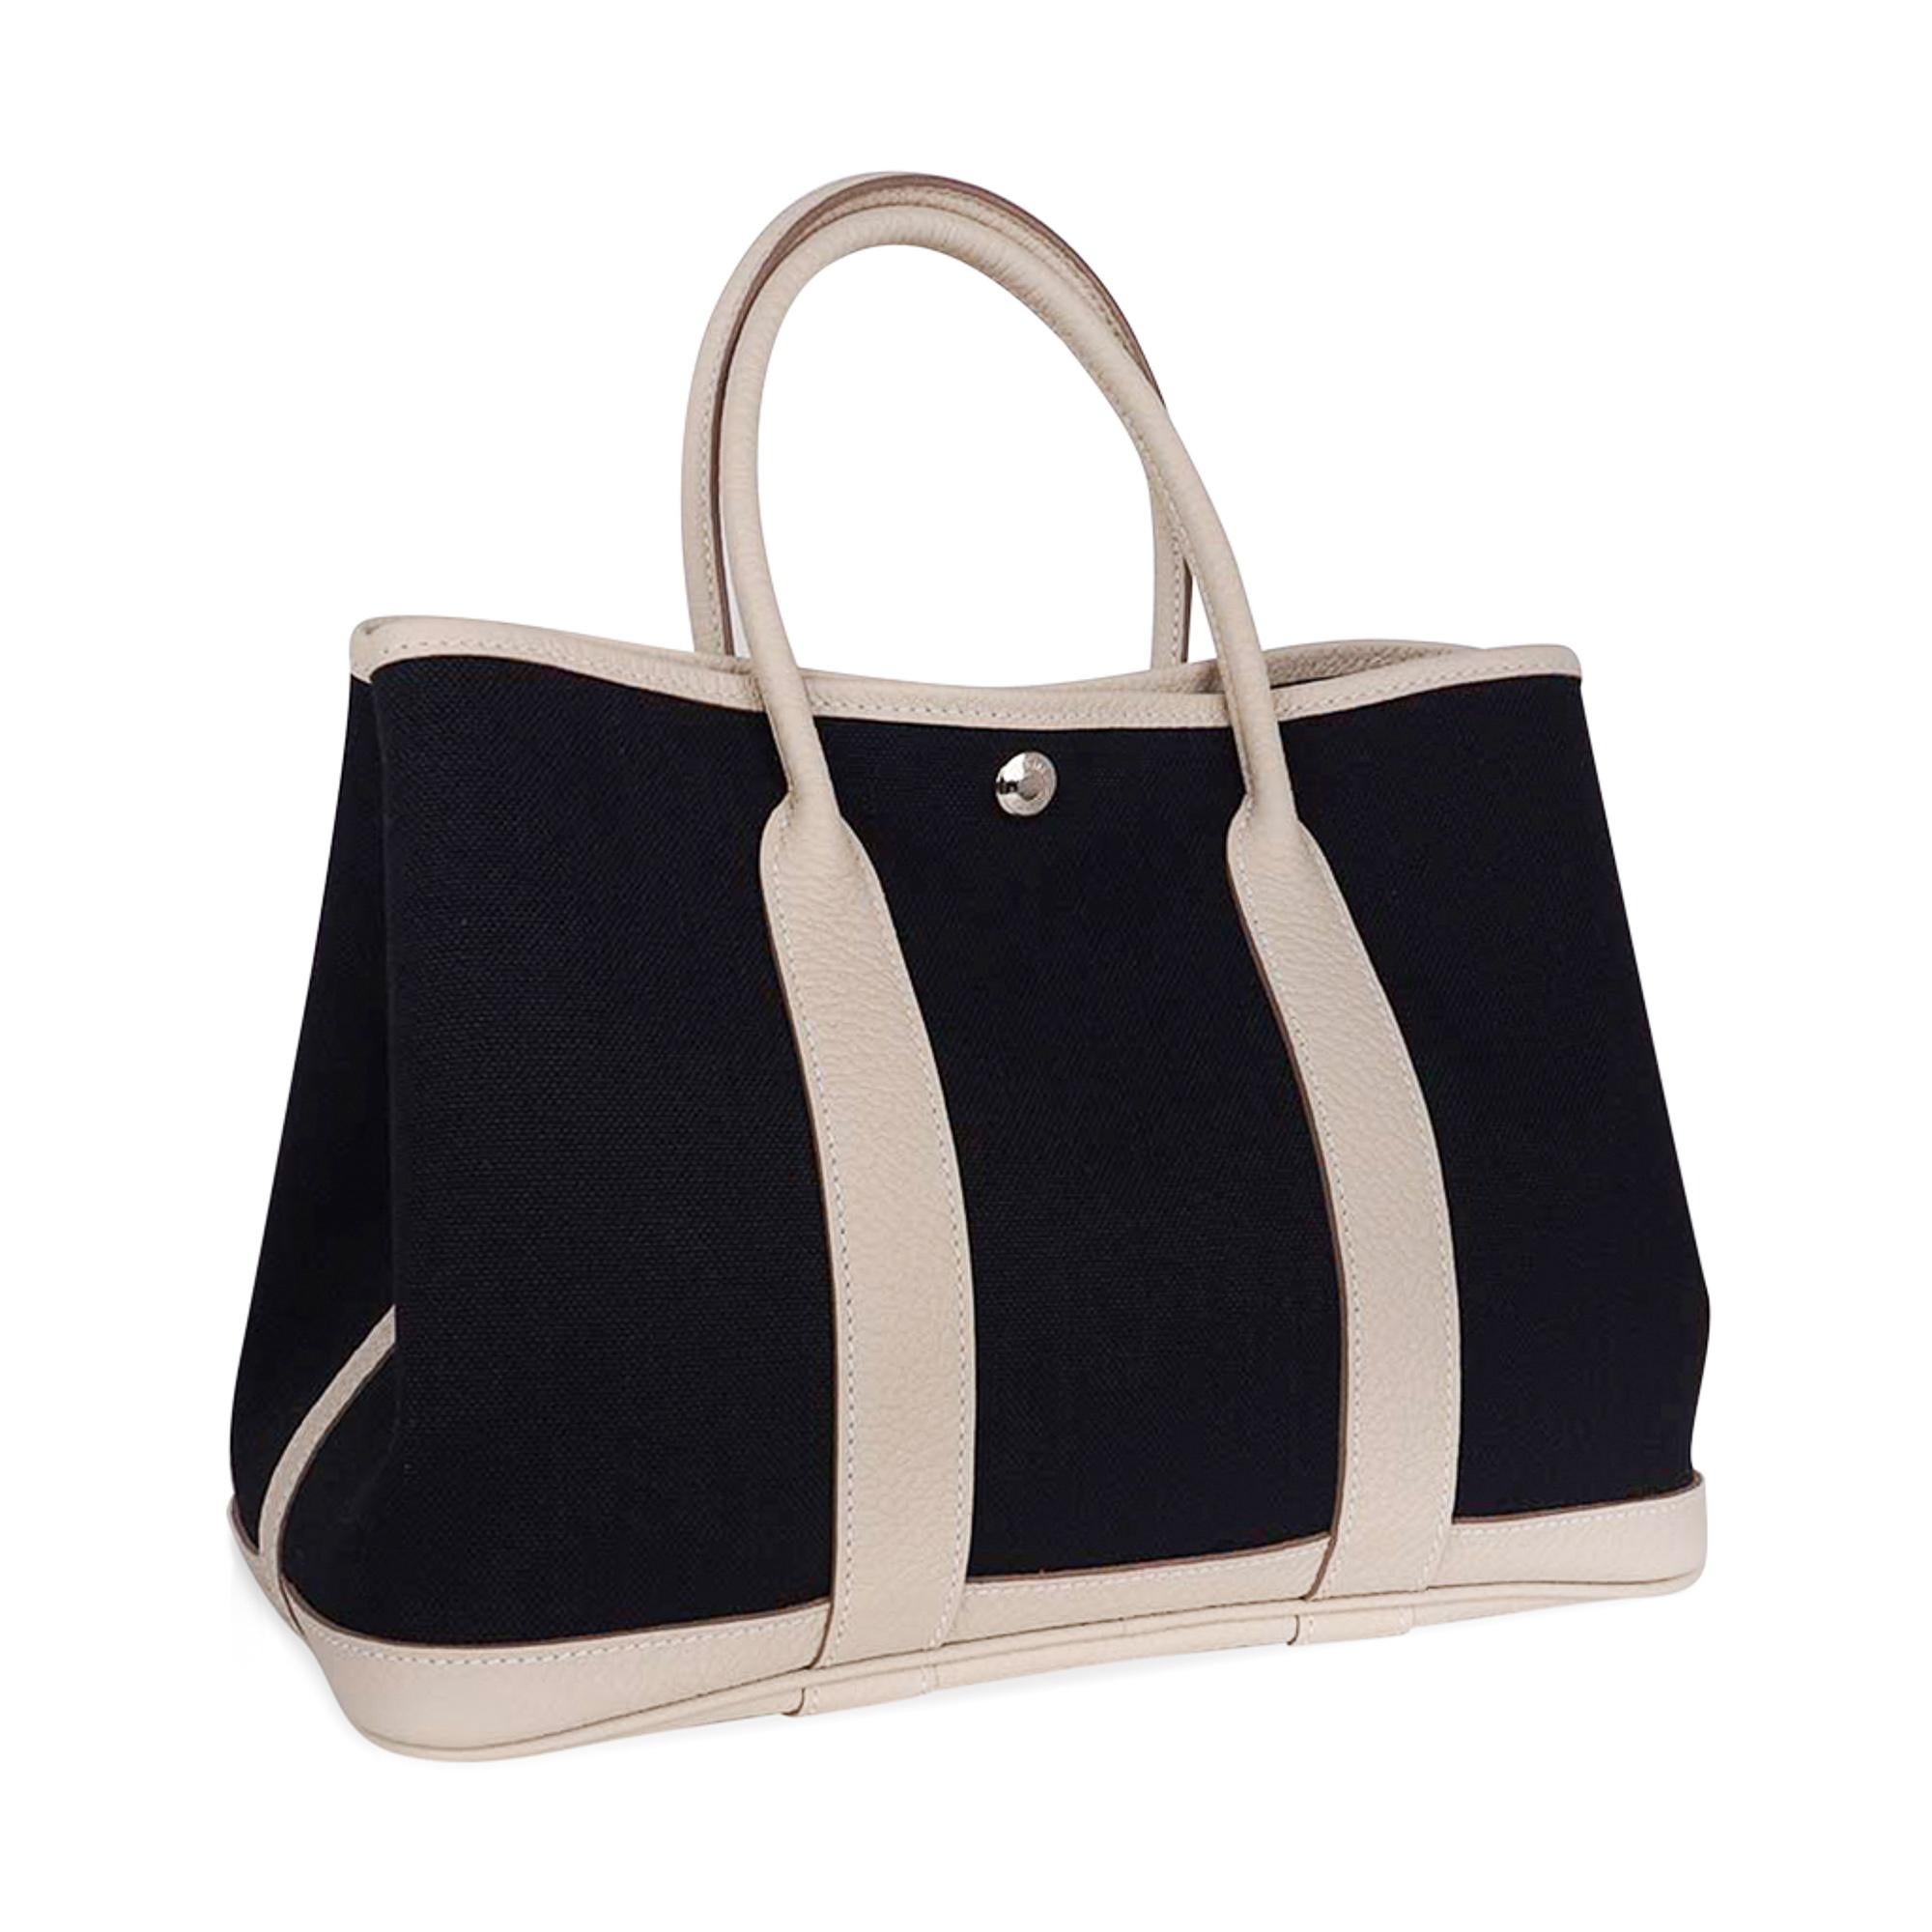 Mightychic offers a guaranteed authentic Hermes Garden Party 30 bag featured in Black Toile and Craie Negonda leather.
Accentuated with palladium Clou de Selle.
Interior is canvas lining and leather base.
Comes with signature Hermes box and